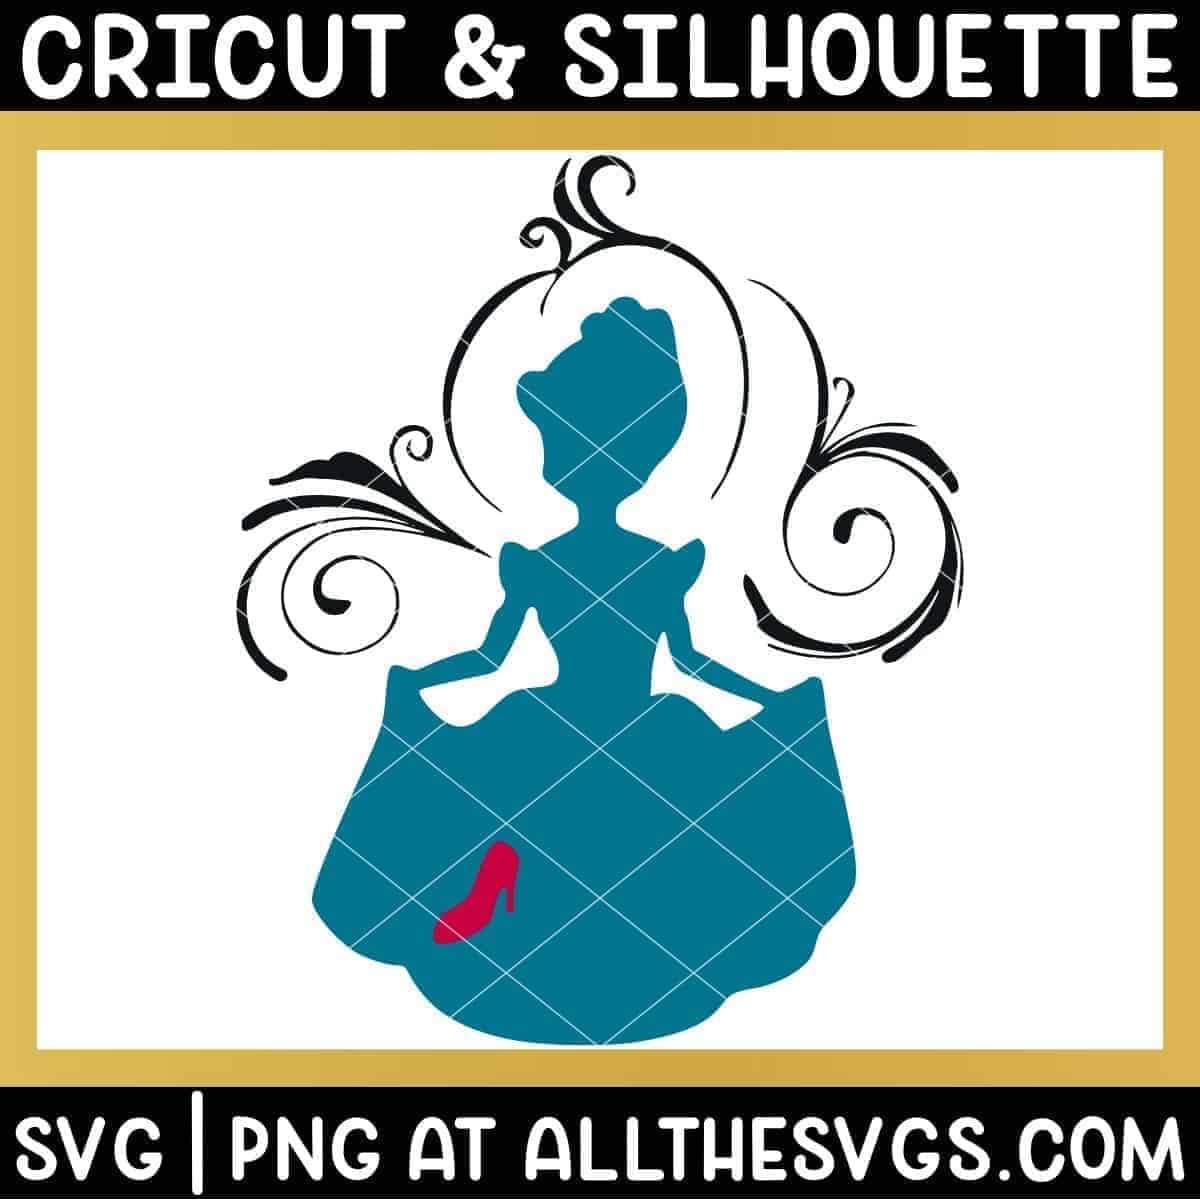 free cinderella svg file chibi anime style disney princess silhouette with swirl and glass slipper.